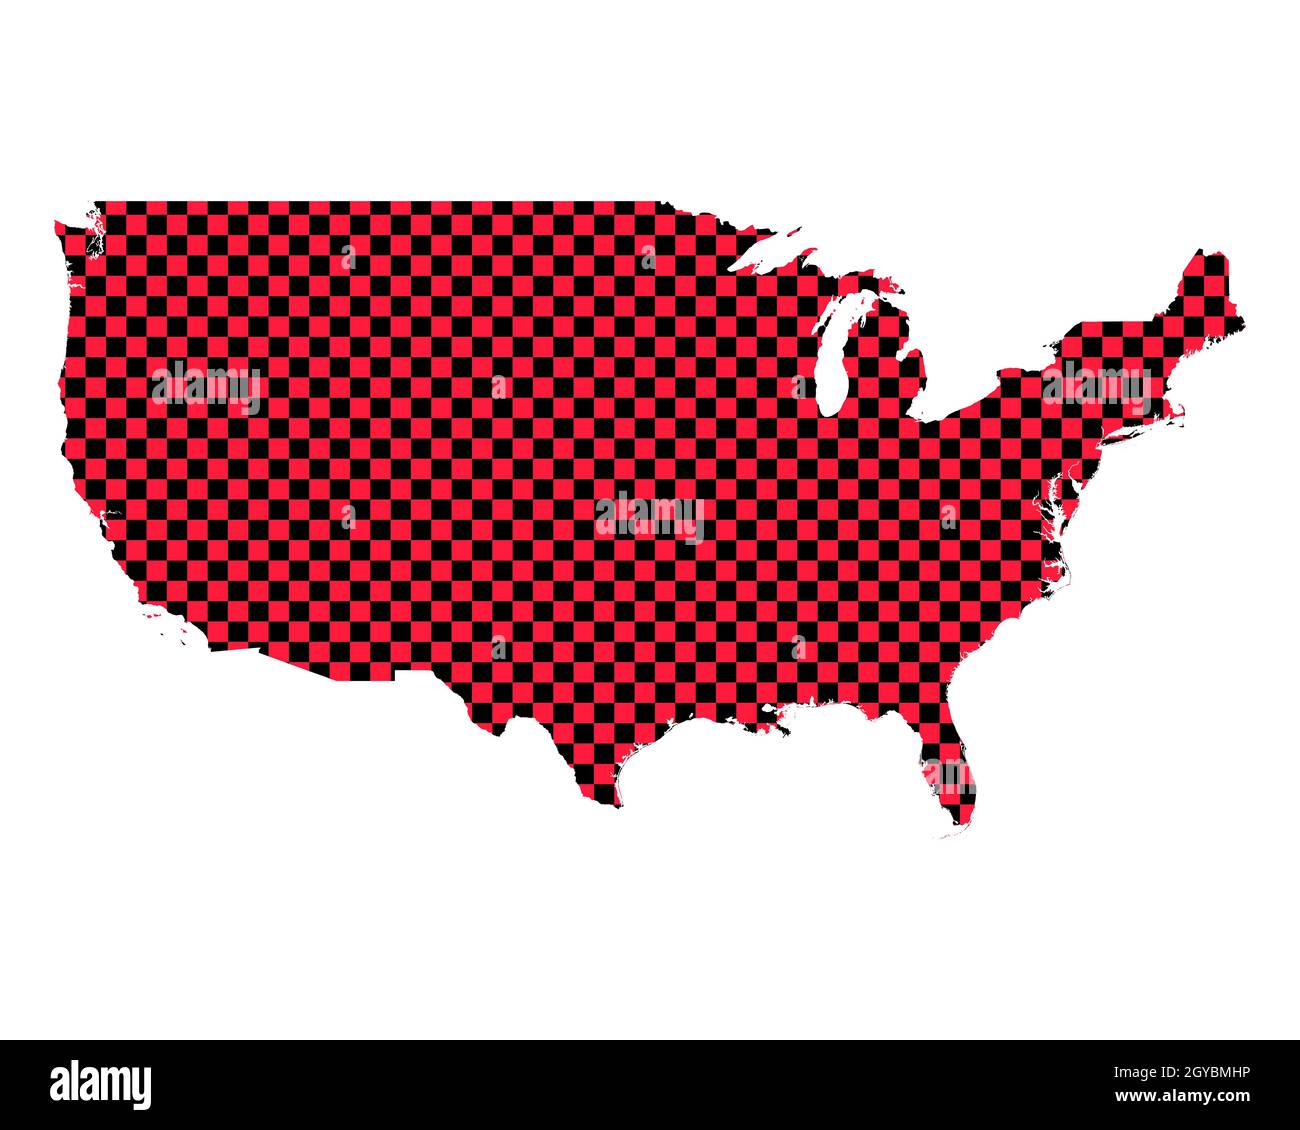 Map of the USA in checkerboard pattern Stock Photo